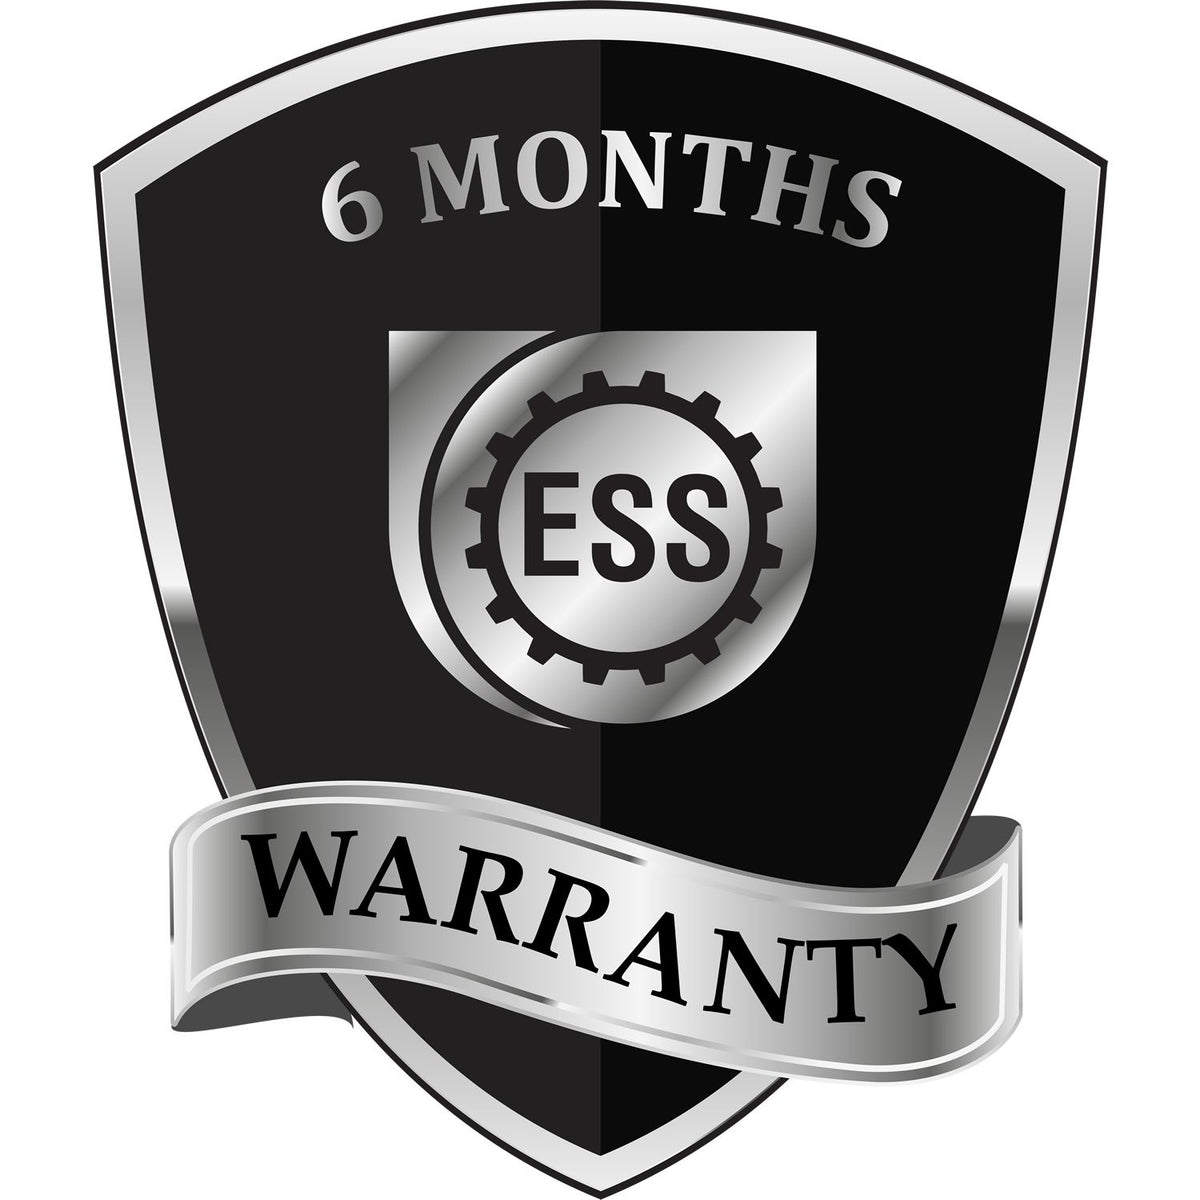 A black and silver badge or emblem showing warranty information for the Slim Pre-Inked Kansas Professional Geologist Seal Stamp